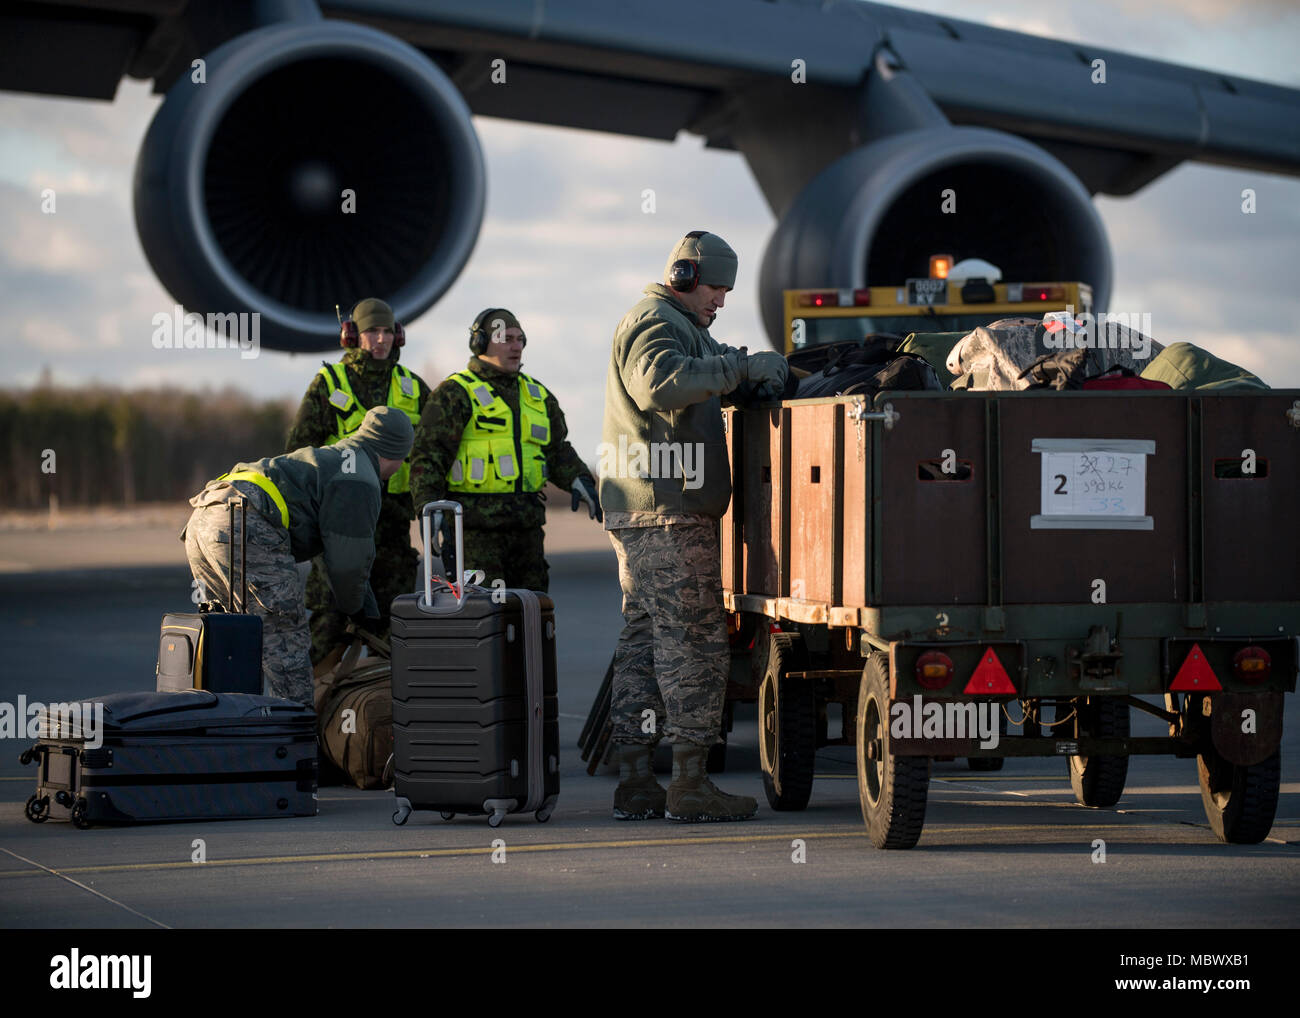 180108-N-YO638-123 AMARI AIR BASE, ESTONIA (Jan. 8, 2018) – U.S. and Estonian Airmen work together to unload supplies from a C-5 Galaxy cargo plane in support of Theater Security Package 18.1, January 8th, 2018. This TSP highlights the U.S.’s ability to deploy fighter aircraft in support of our partners and allies in the European theater and around the world. (DoD photo by MC3 Cody Hendrix/Released) Stock Photo